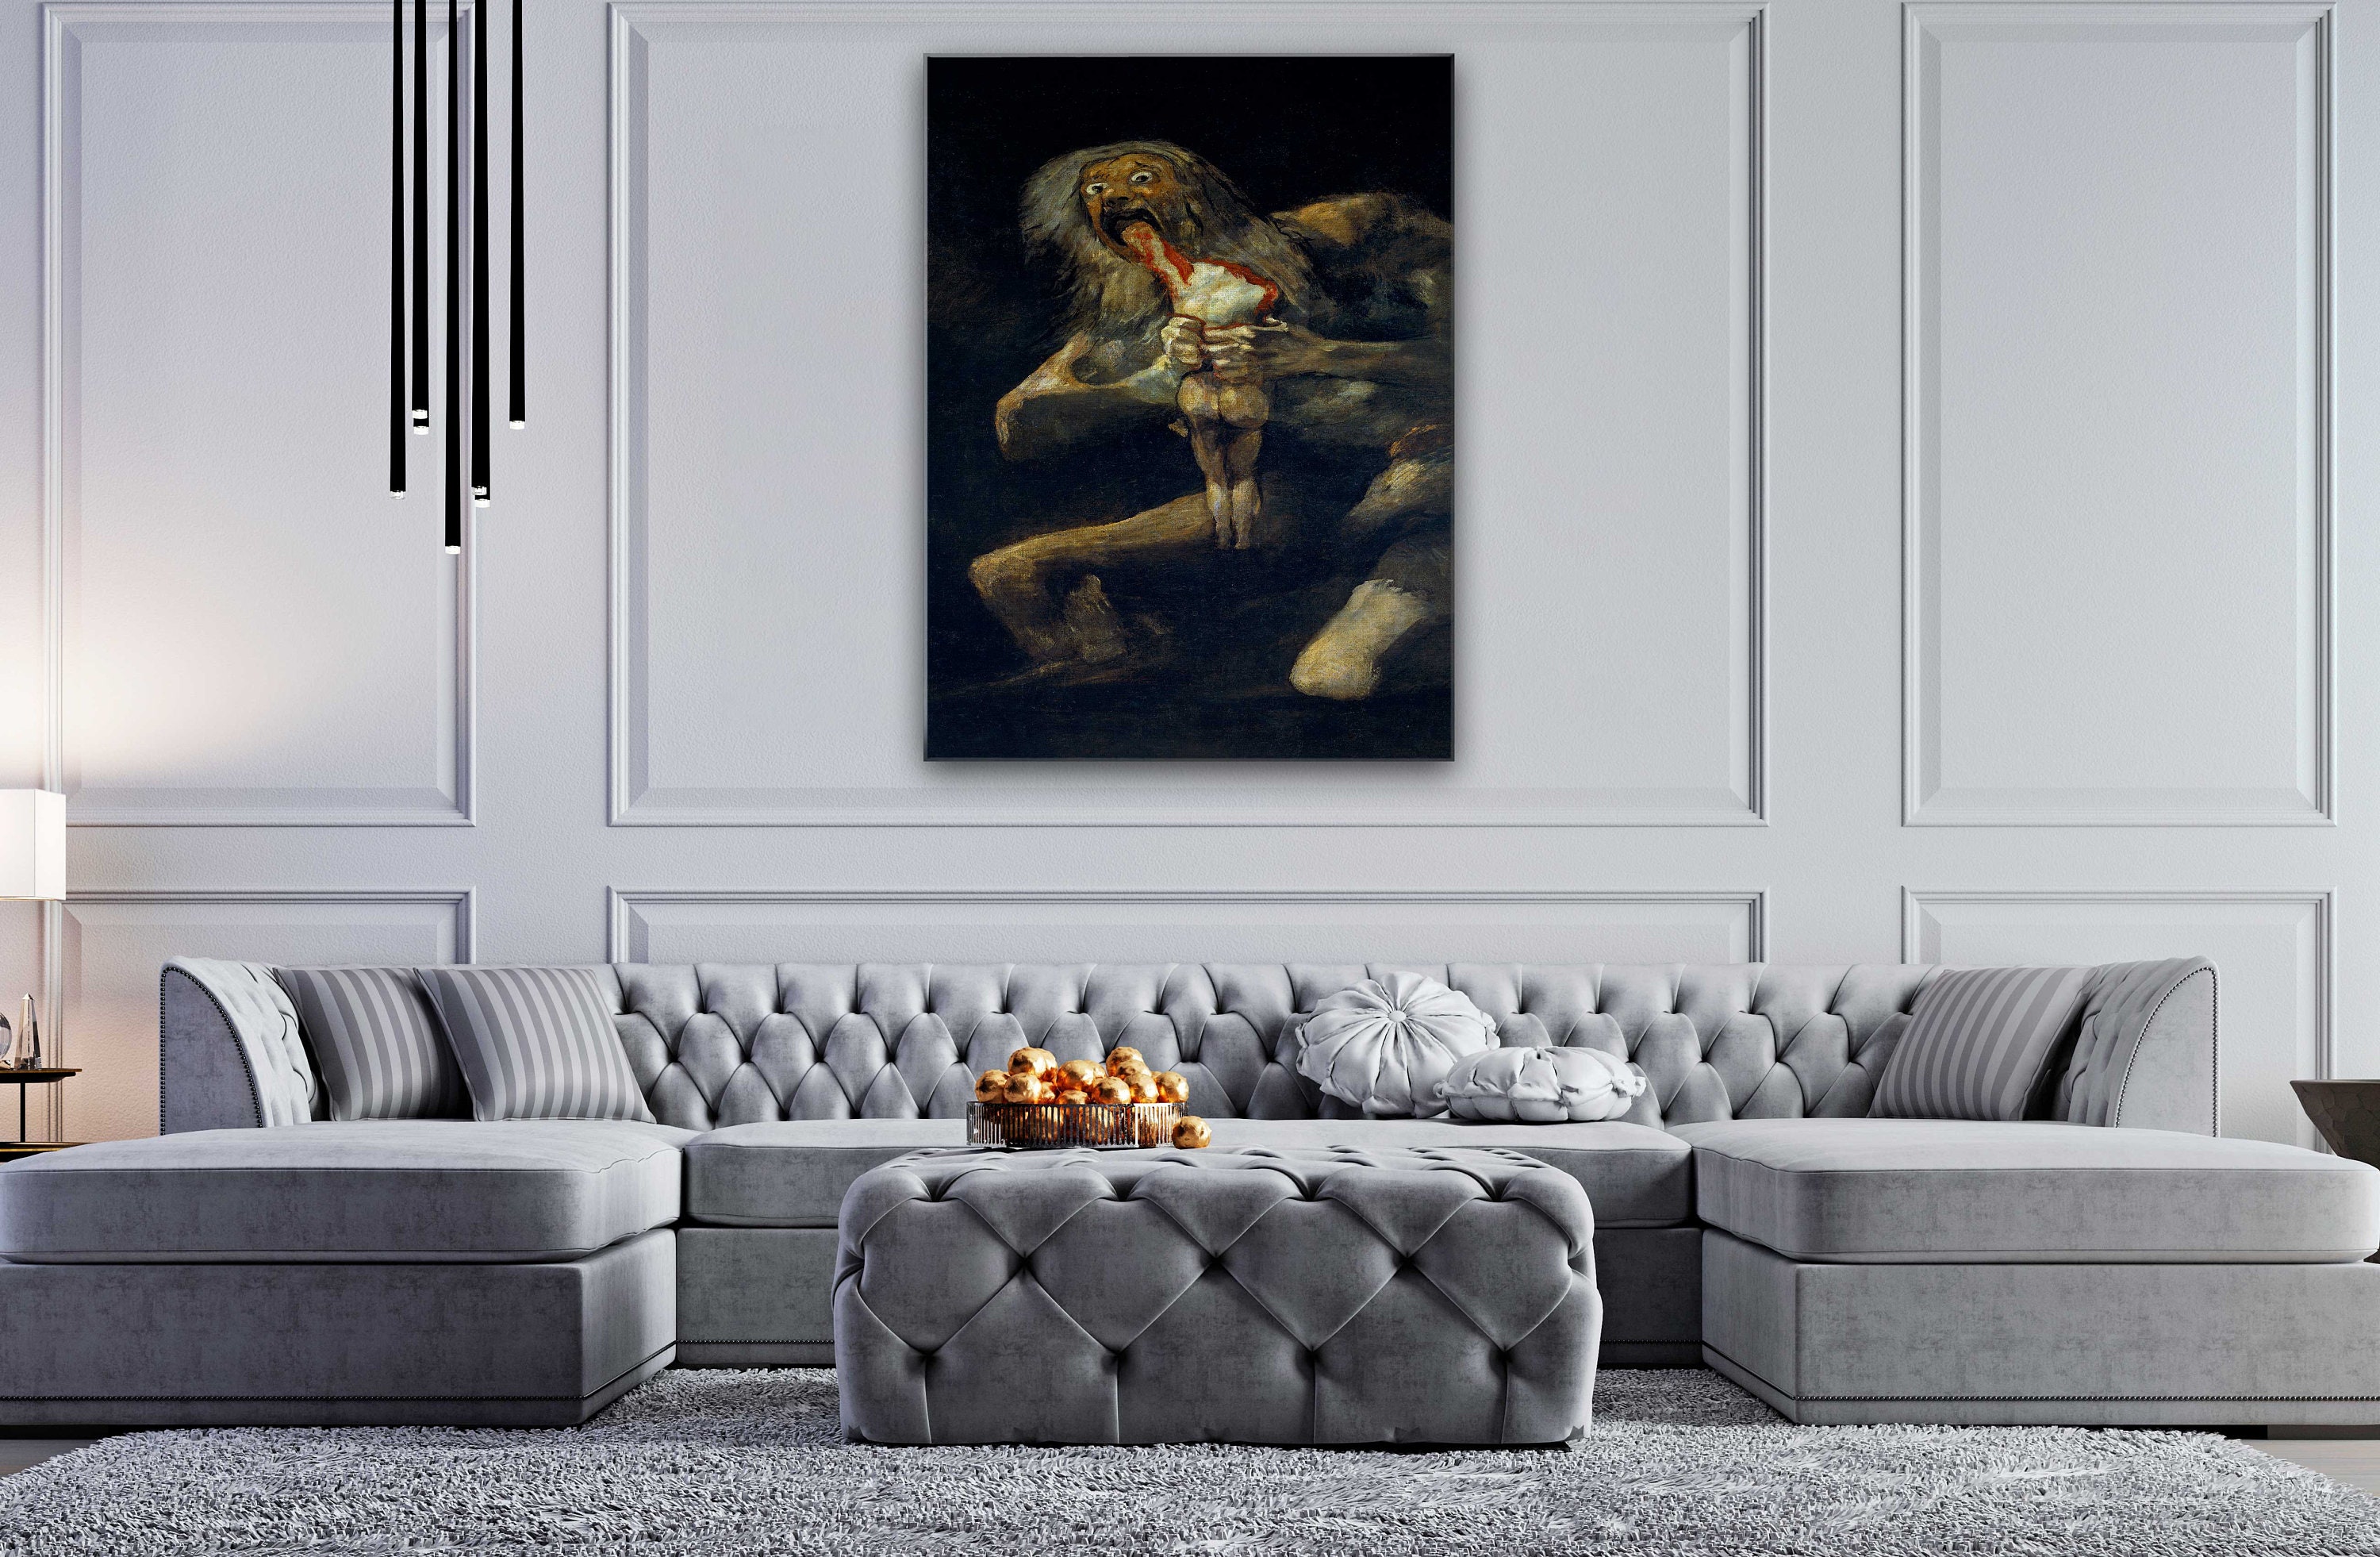 Saturn Devouring His Son by Goya Canvas Wall Art Design - Etsy